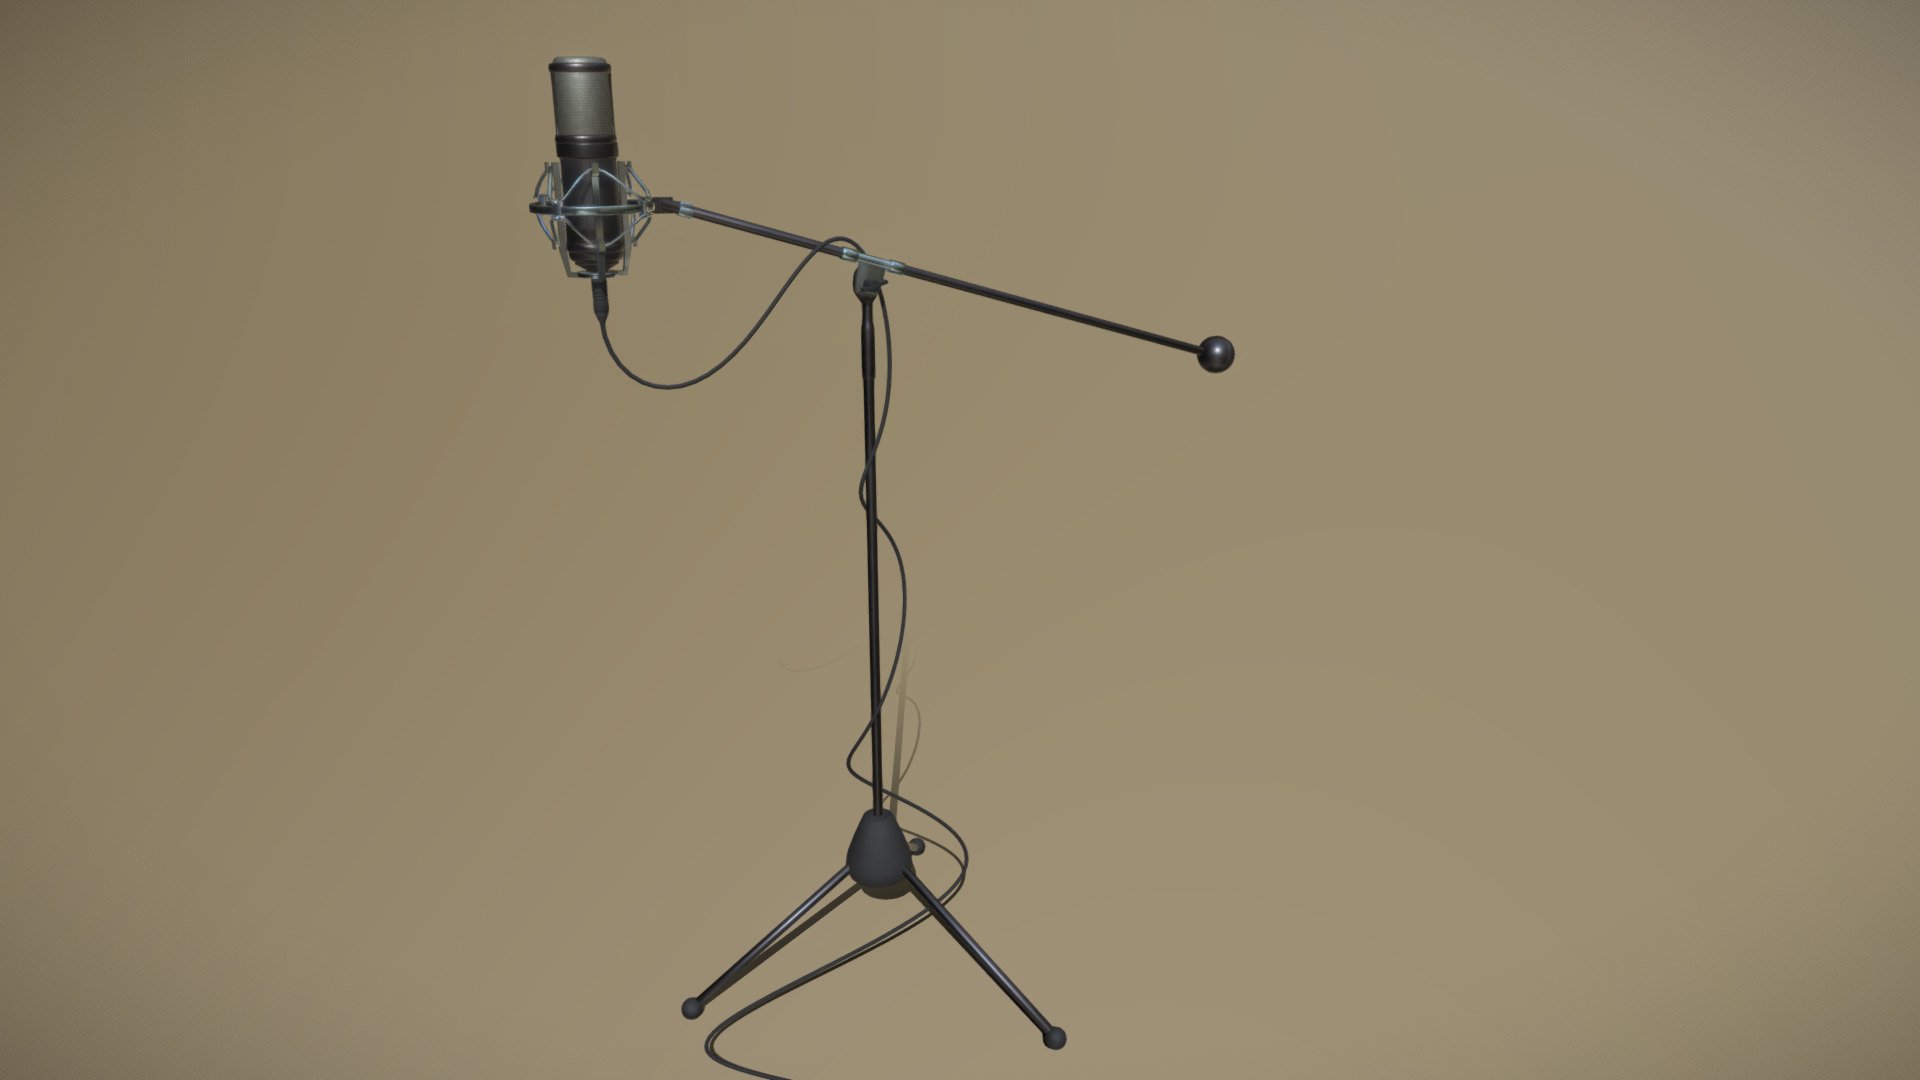 Low poly Microphone, 12 463 polygons
Game Ready - Microphone - Buy Royalty Free 3D model by Andrei Cristian (@AndreiCristian93) 3d model